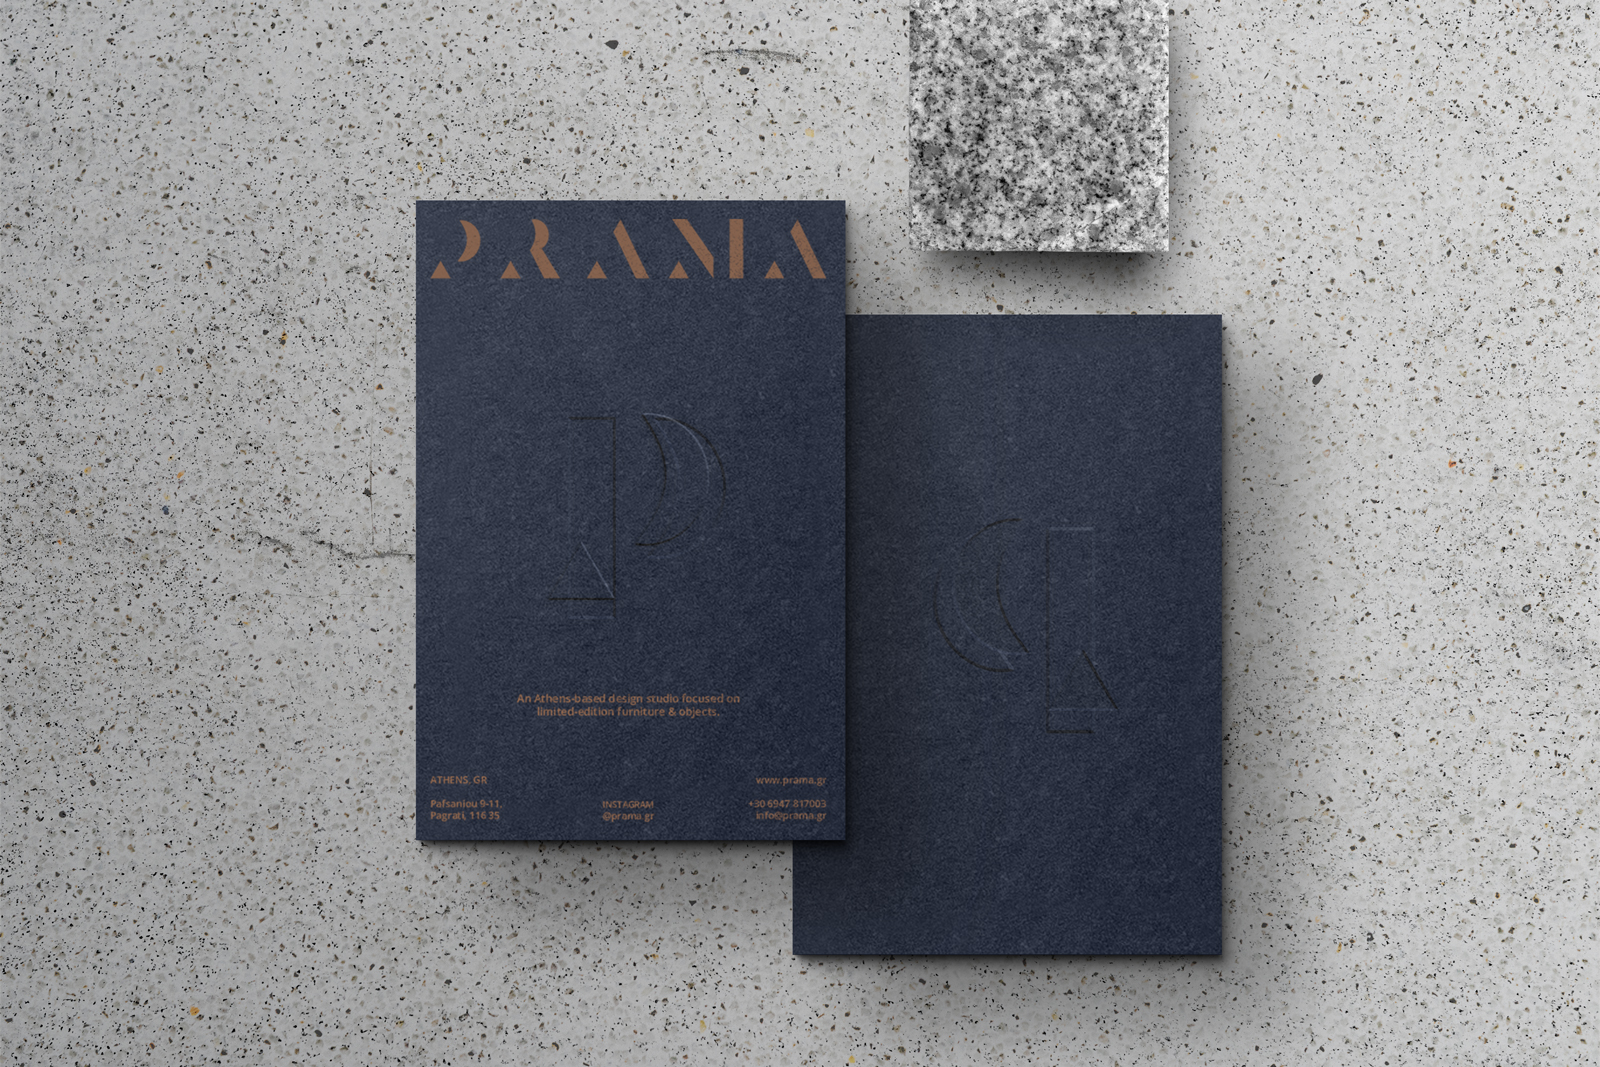 Archisearch The creative team PRAMA, presents on Thursday, June 22, at 19:00 in its showroom in Pagrati its first collection of objects under the name 